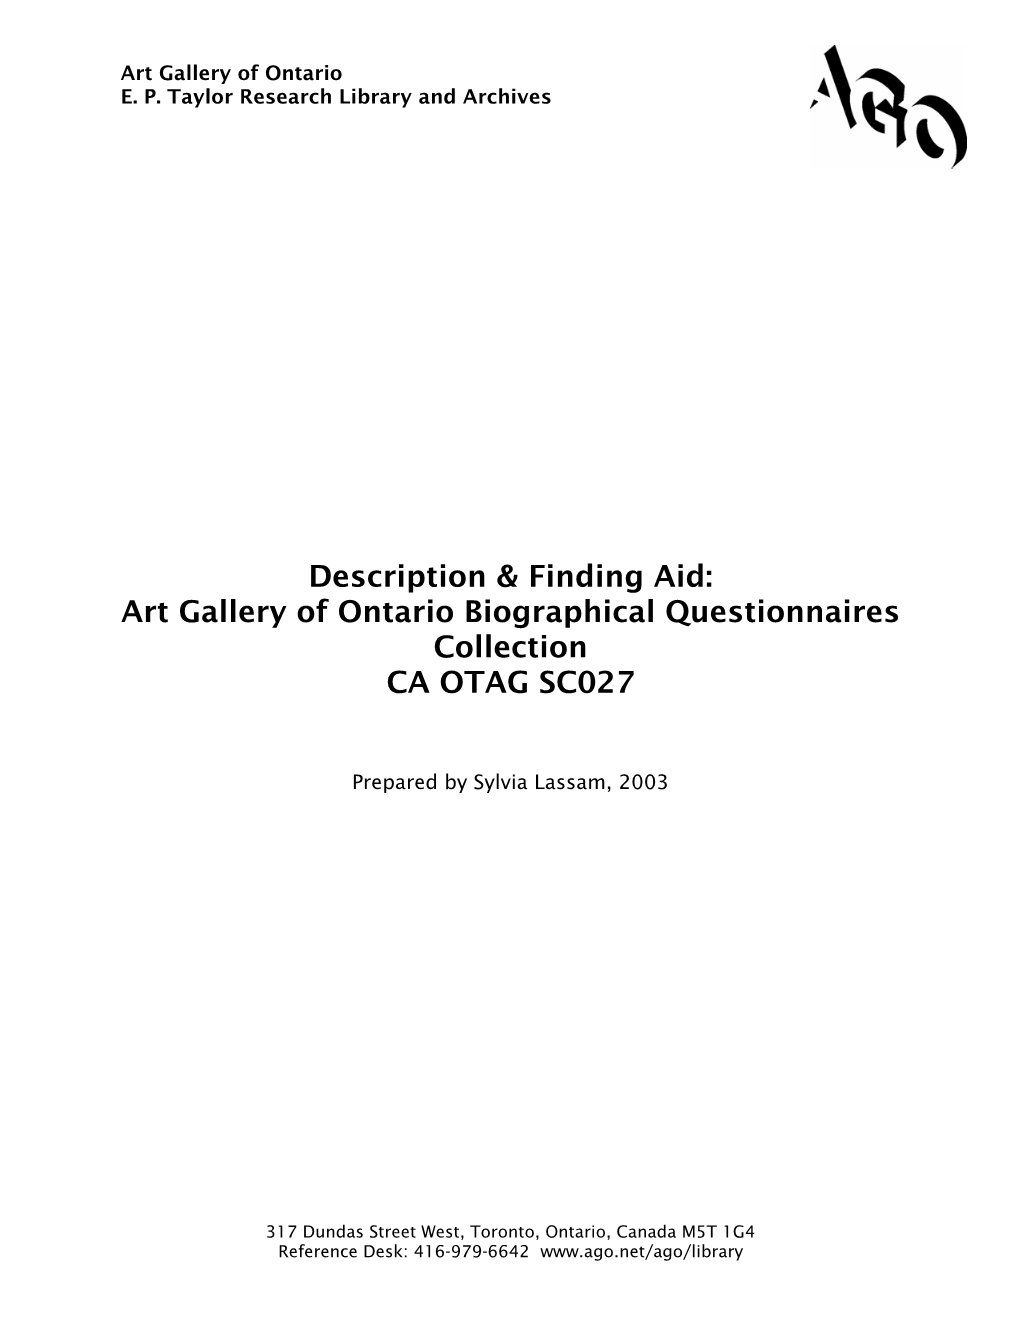 Description & Finding Aid: Art Gallery of Ontario Biographical